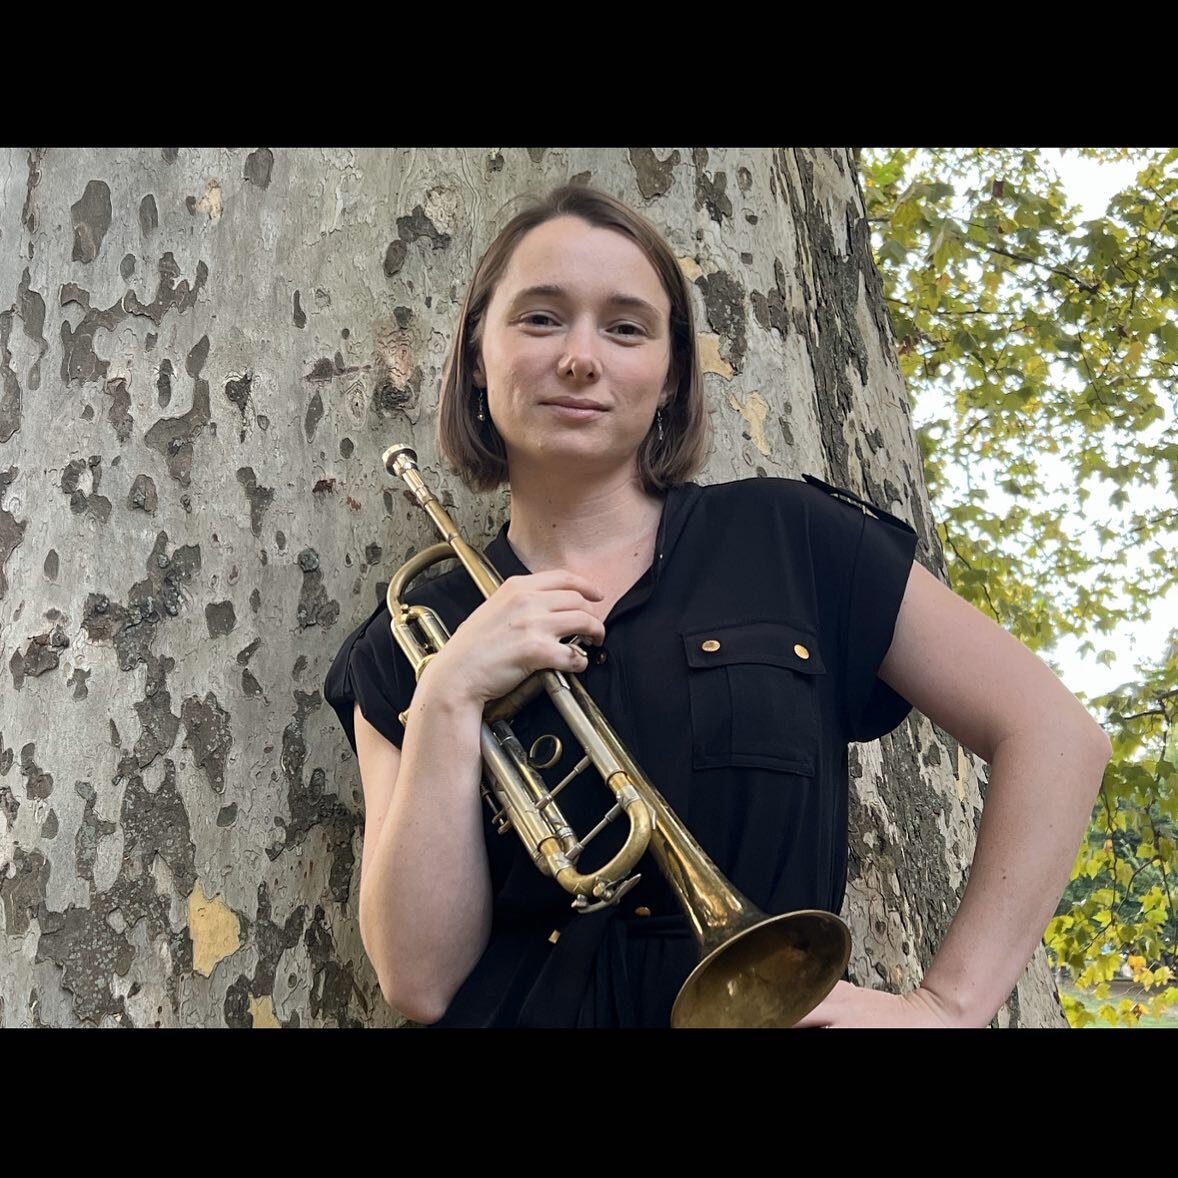 Meet the members! @paige_lkerrigan 
🎶
Paige Kerrigan is an active performer and administrator in the New Jersey and Philadelphia areas. She is a founding member of the all-female brass quintet Coda Brass, and she plays solo cornet with the Atlantic 